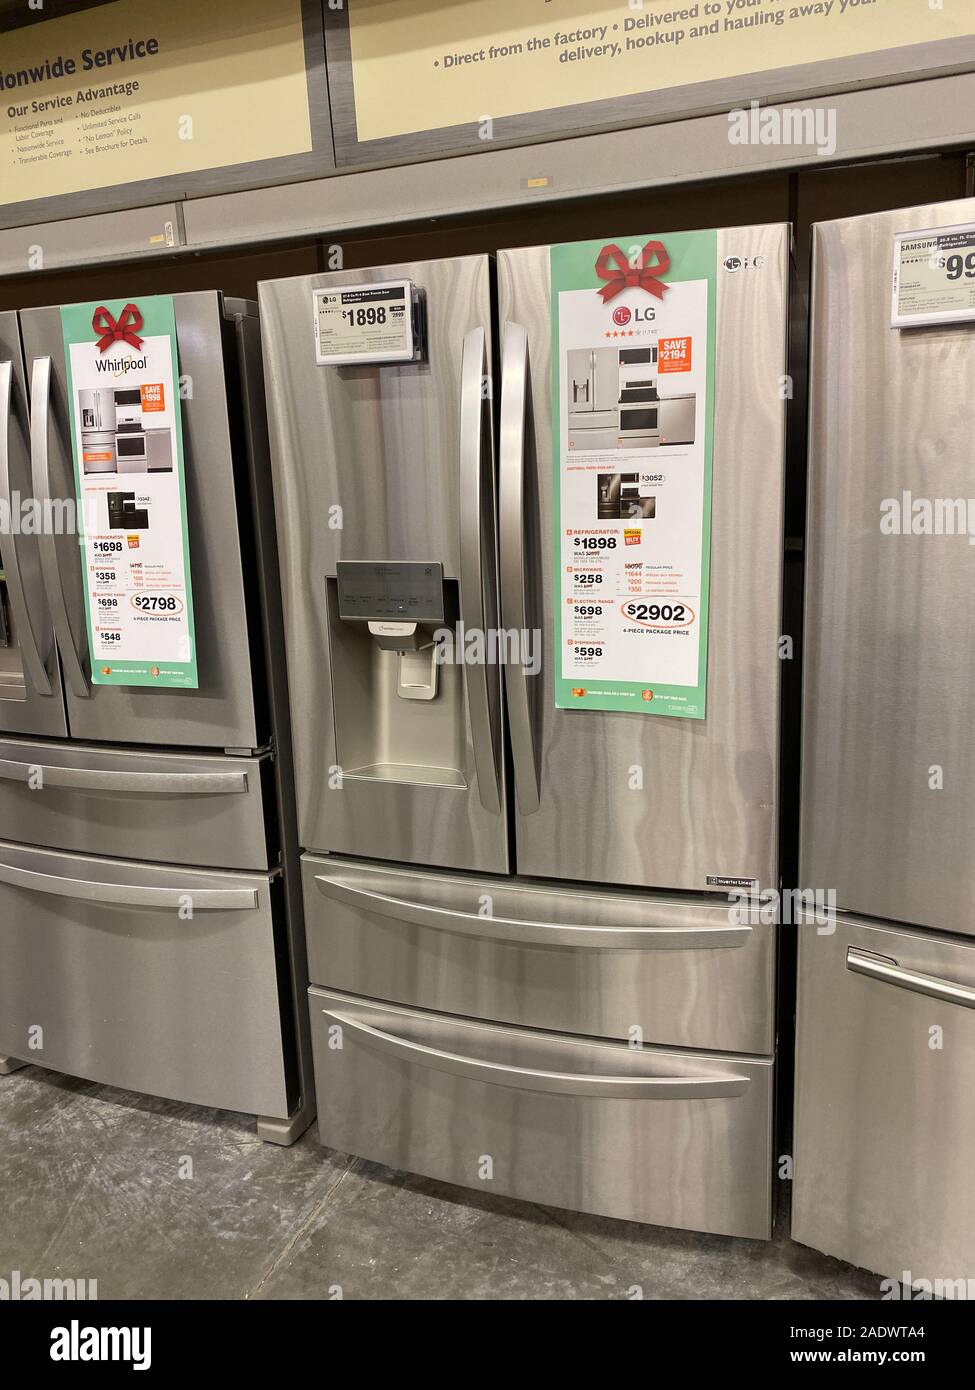 Orlando,FL/USA-11/11/19: A LG, Samsung, and Whirlpool stainless steel french door refrigerators on sale at a Home Depot Store. Stock Photo